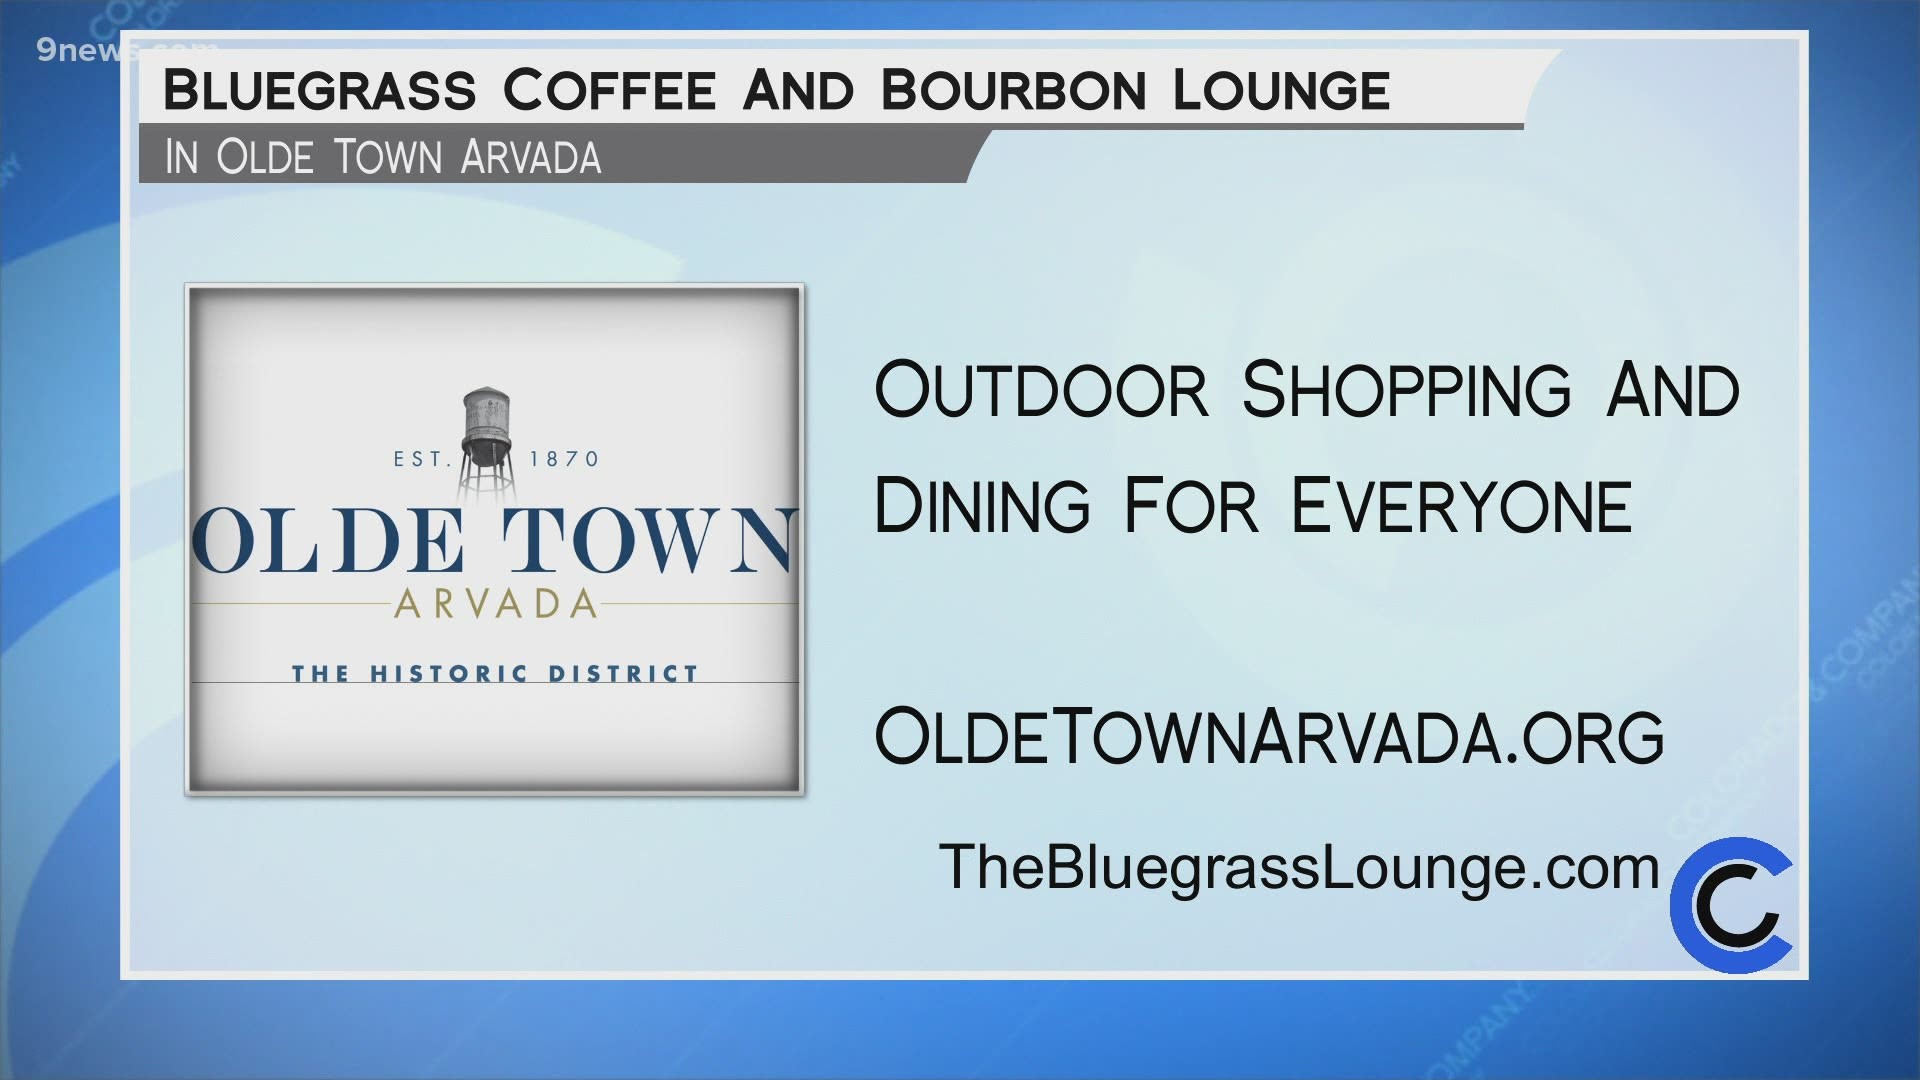 Support local businesses like this one and enjoy the vibrant atmosphere in Olde Town Arvada. Learn more at OldeTownArvada.org.